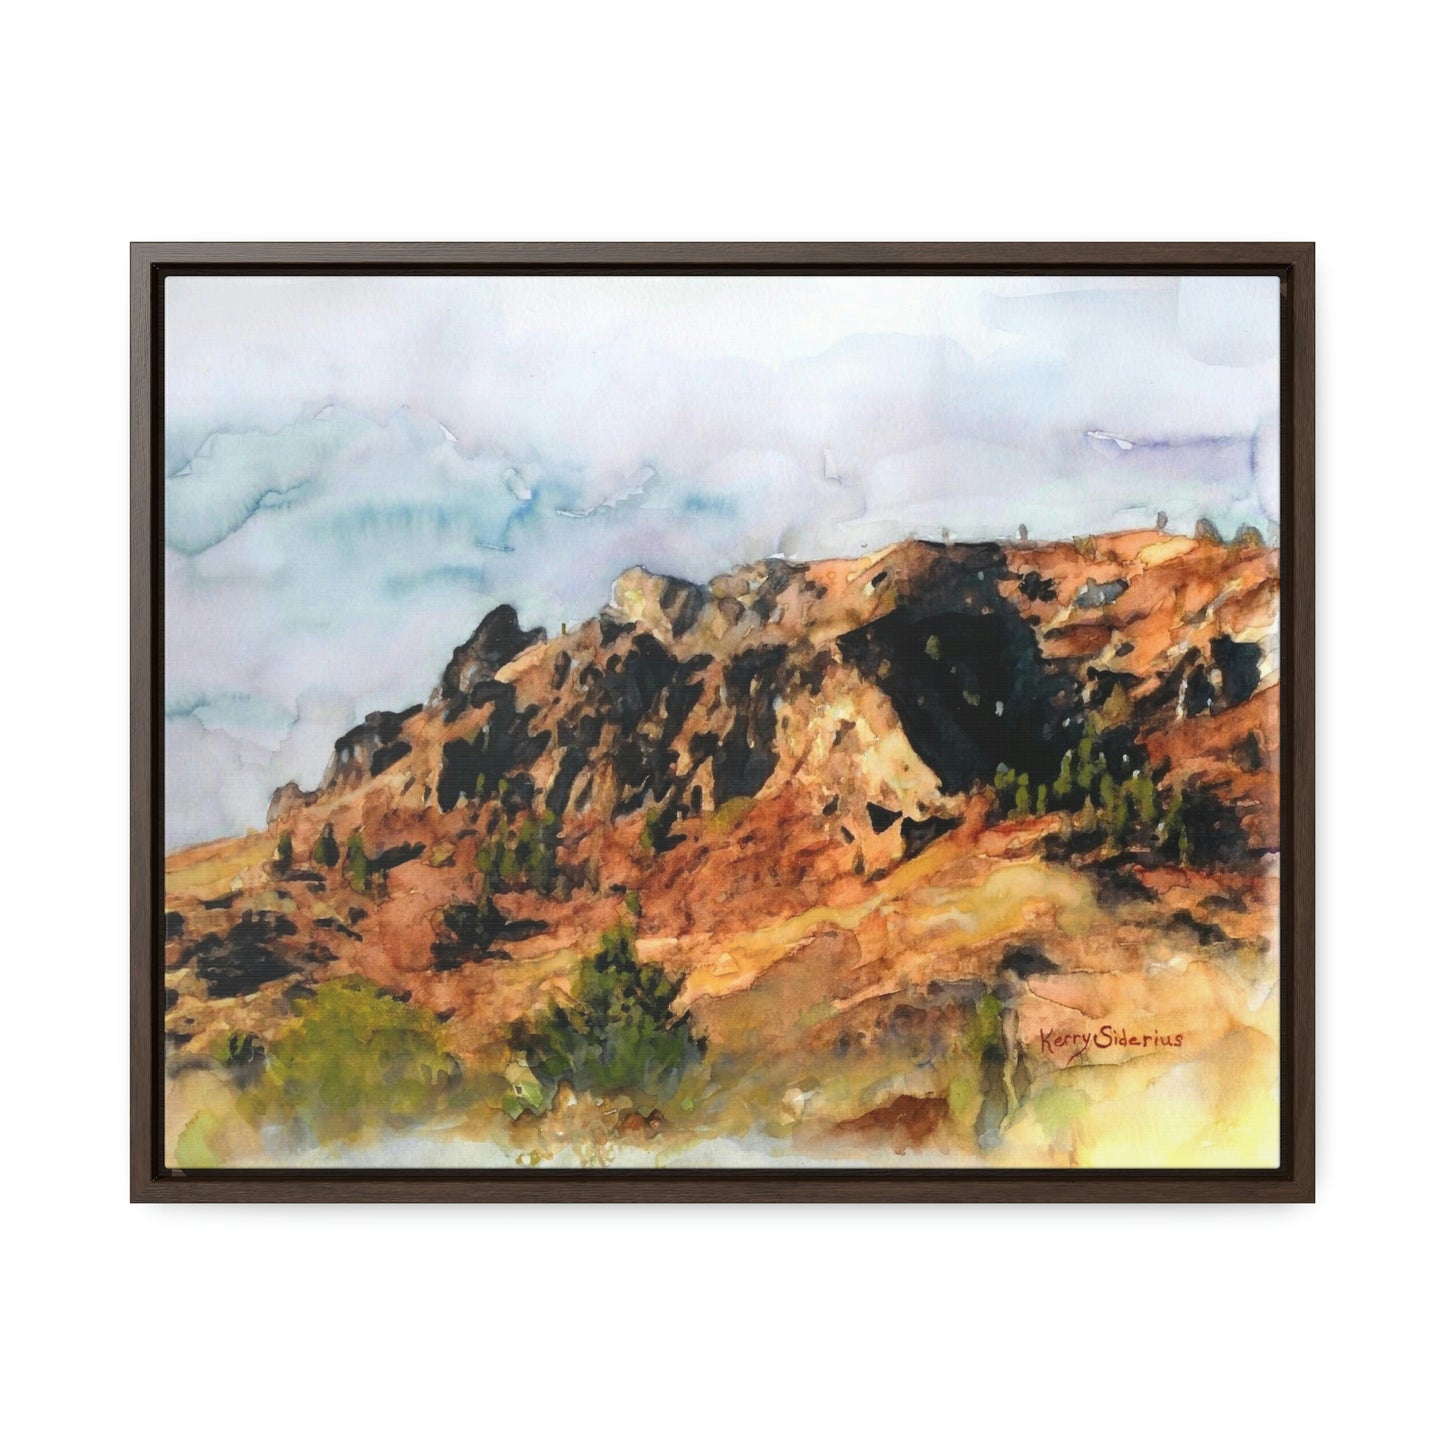 "Saddle Rock, Early Spring" Wood-Framed Gallery Wrapped Canvas - Kerry Siderius Art 